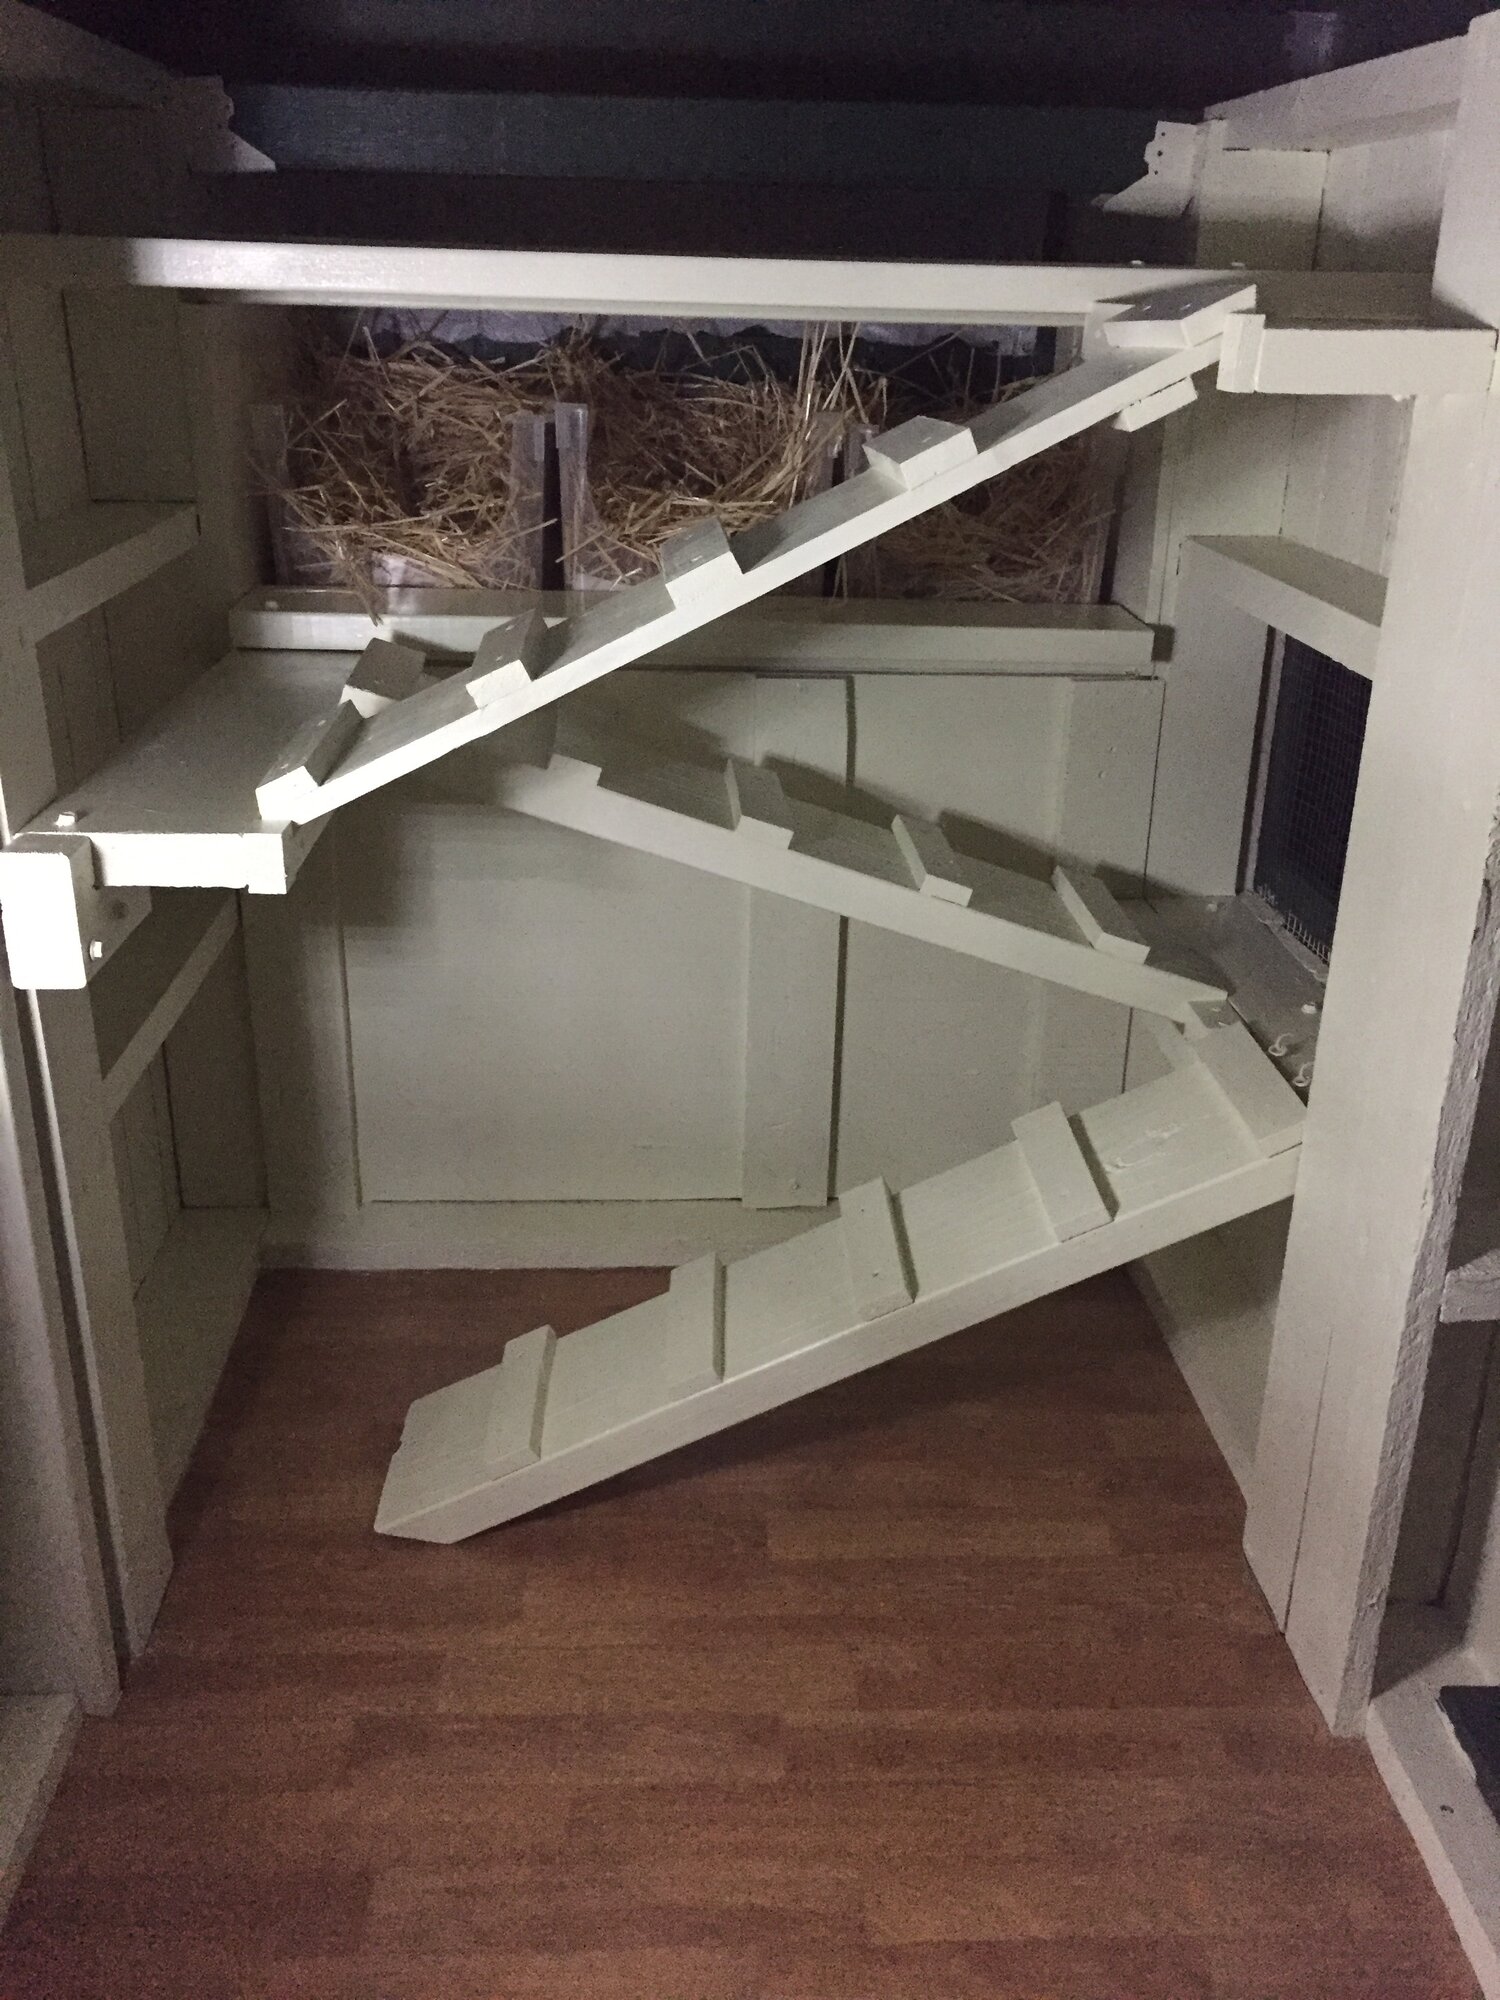 Inside - stairs to laying boxes and perches